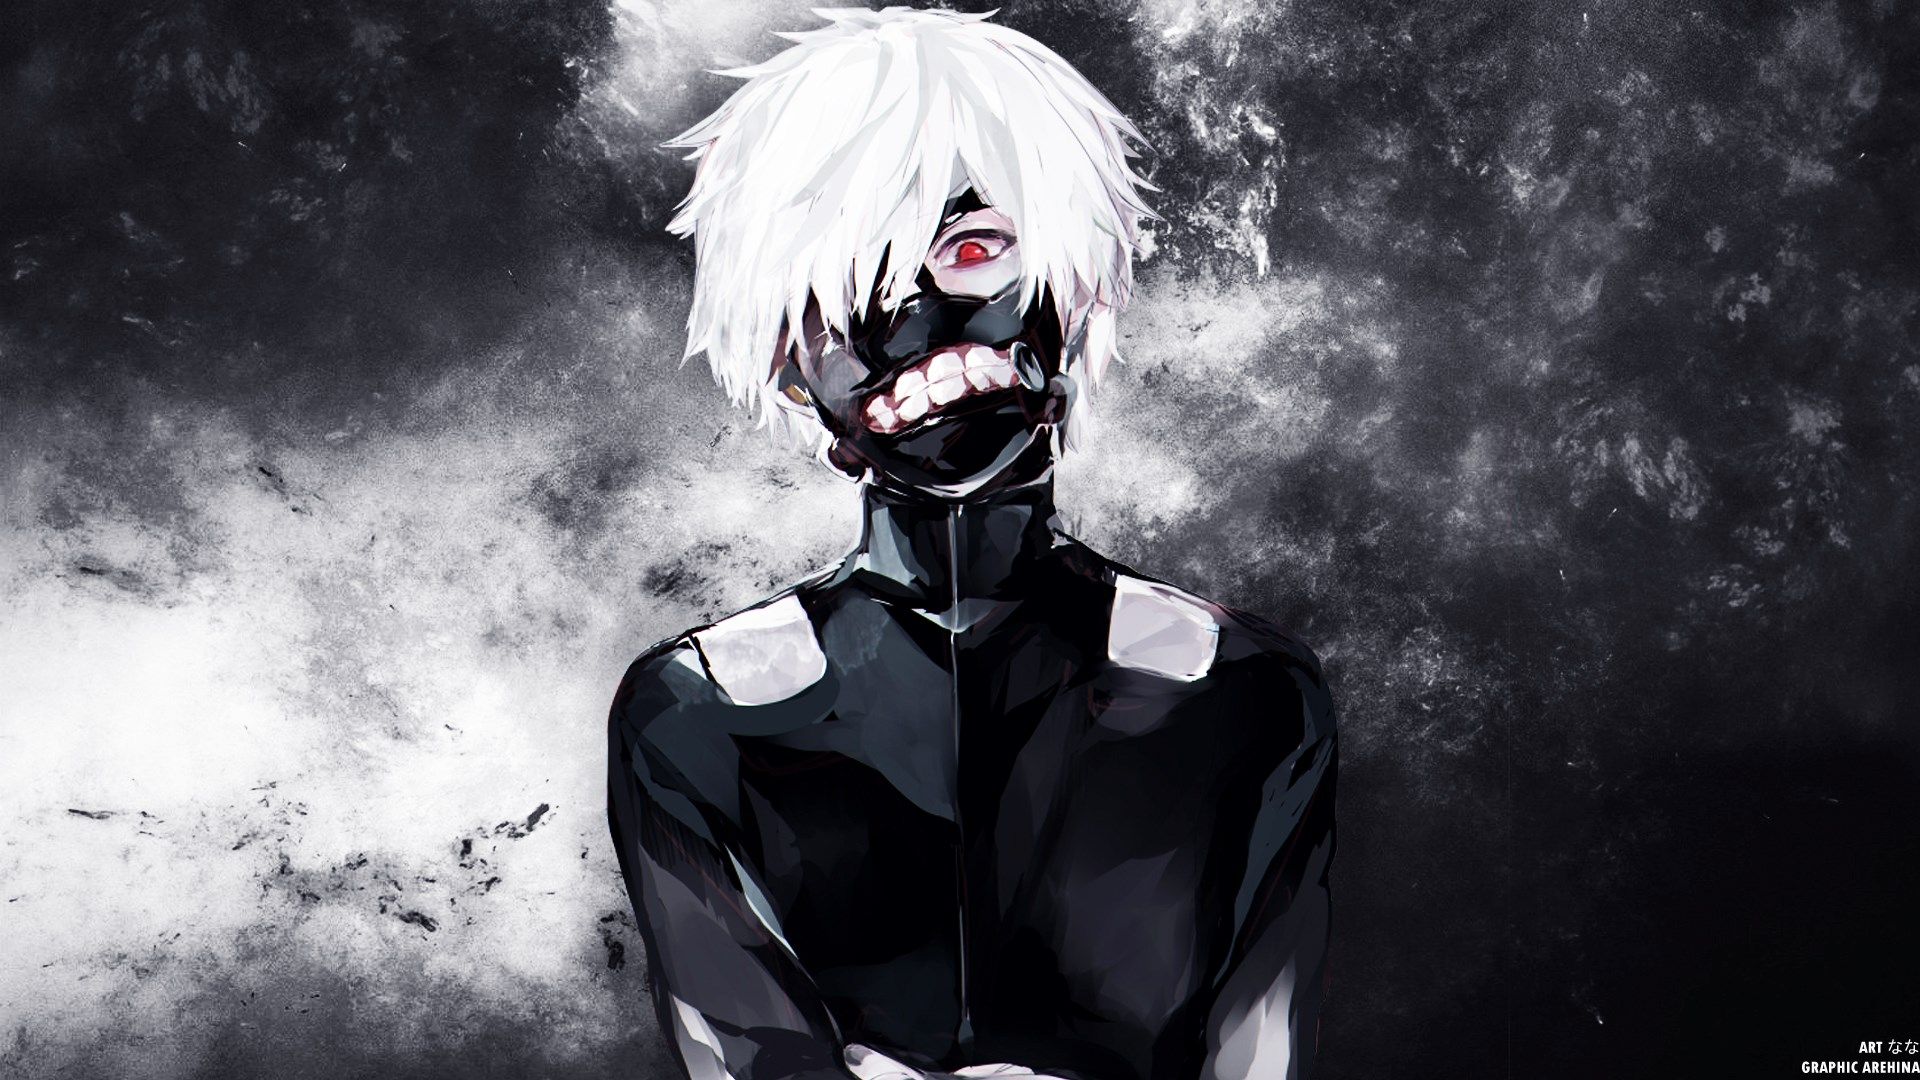 Tokyo Ghoul Wallpaper For Mac Puters Category